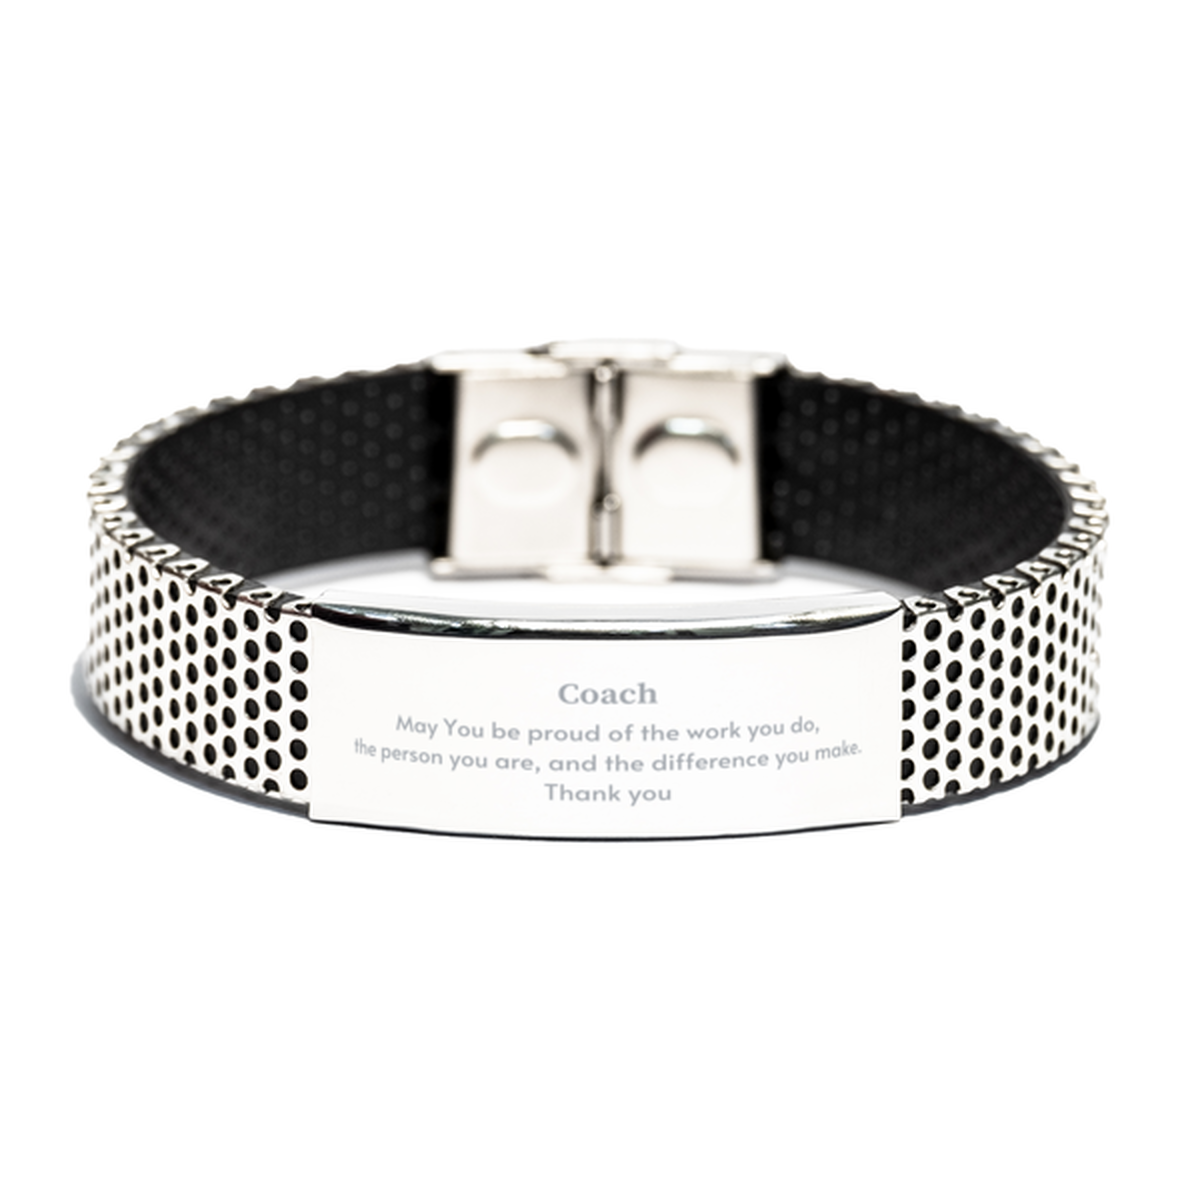 Heartwarming Stainless Steel Bracelet Retirement Coworkers Gifts for Coach, Coach May You be proud of the work you do, the person you are Gifts for Boss Men Women Friends